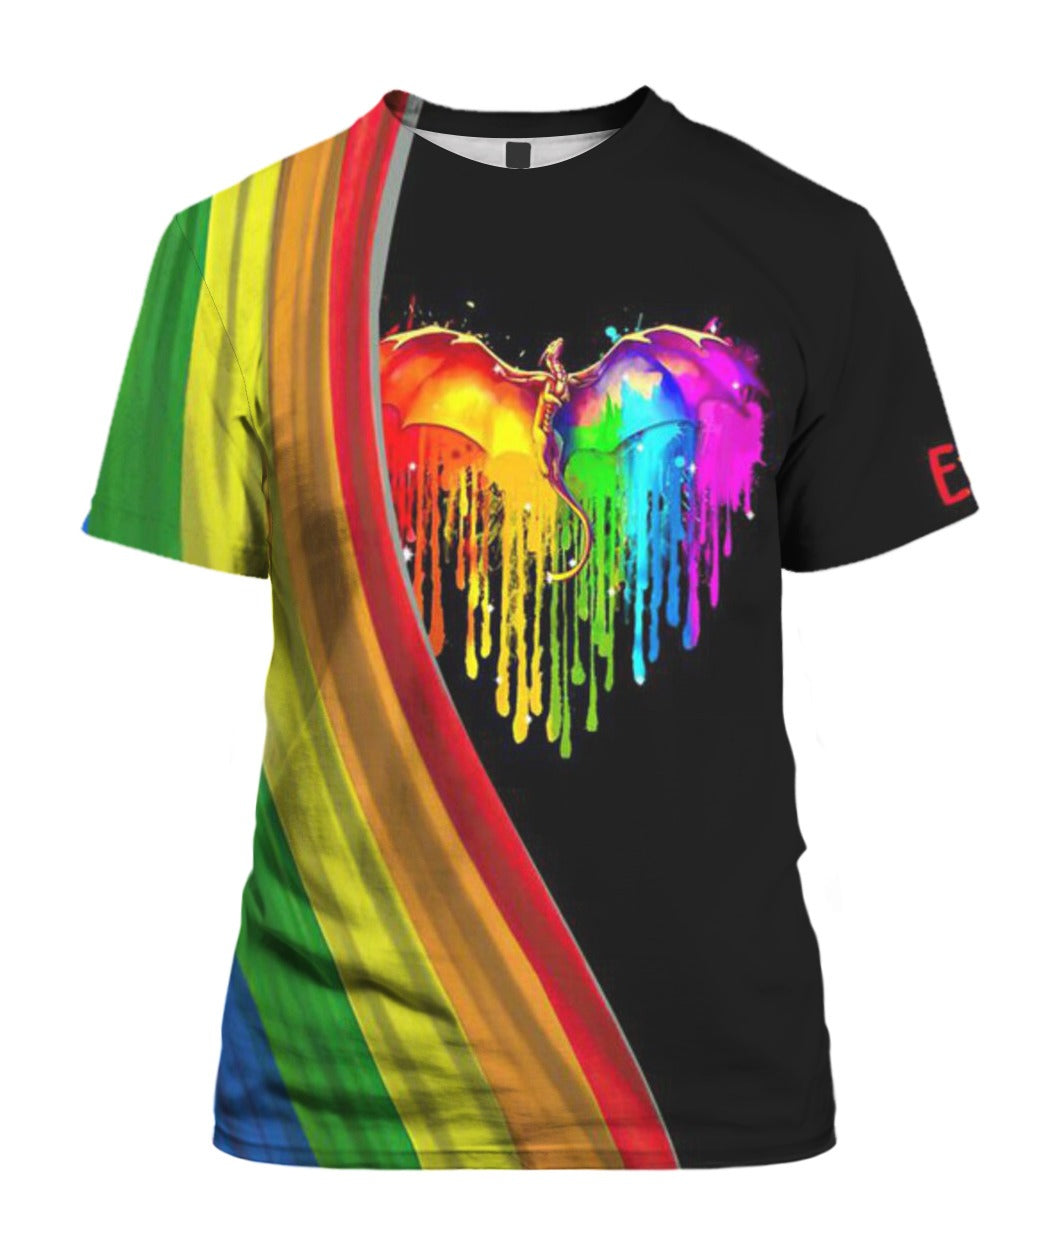 Personalized Pride Shirt For Gayer/ 3D Shirt All Over Print Gift For Gay Friend/ Supper Gay In Every Universe